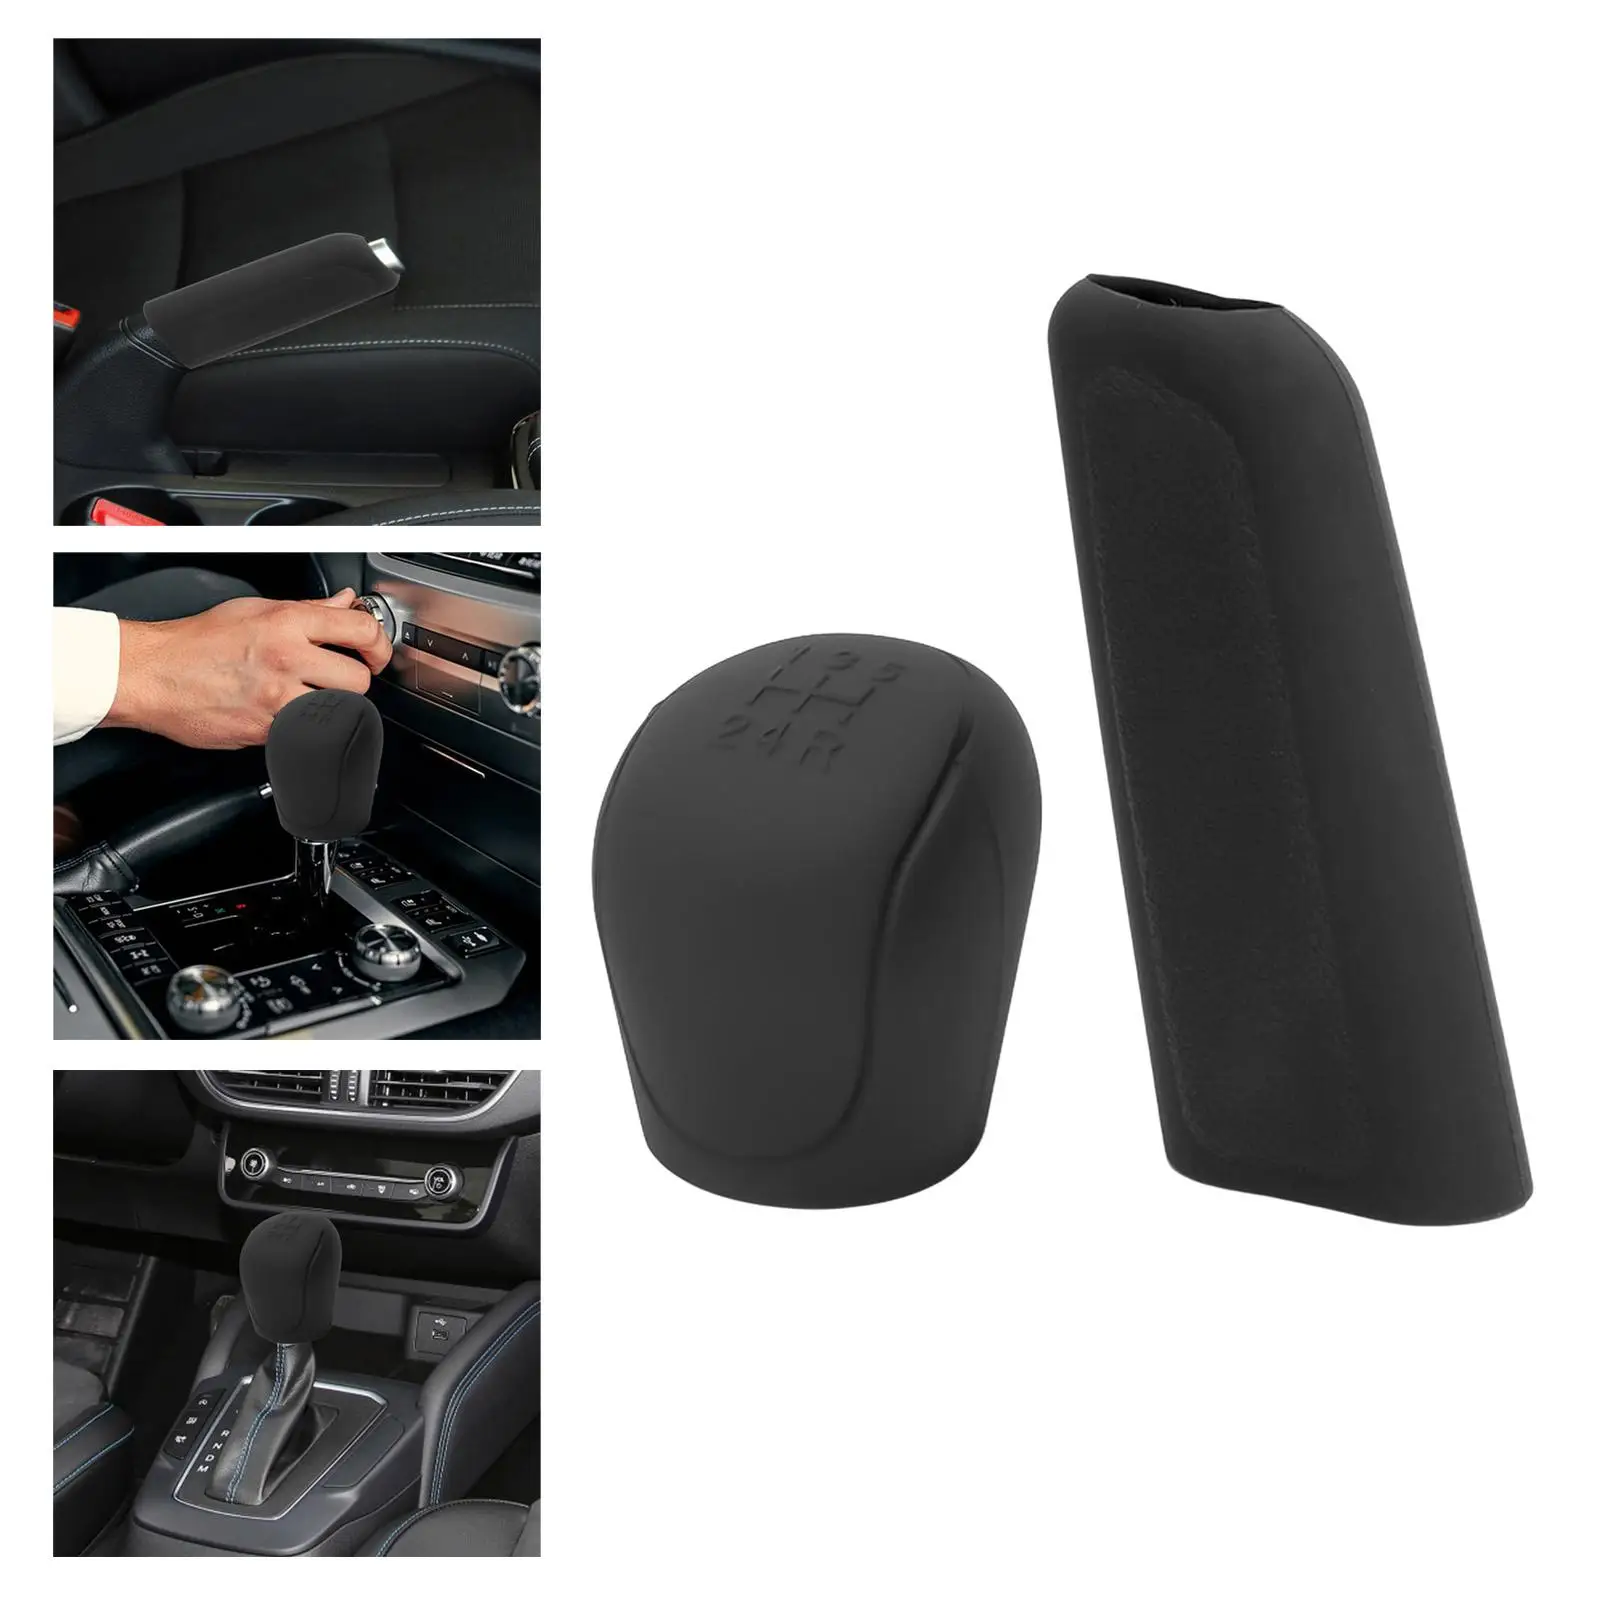 Gear Shift Knob Cover Silicone Handbrake Grip Cover for Ford Focus Replacement